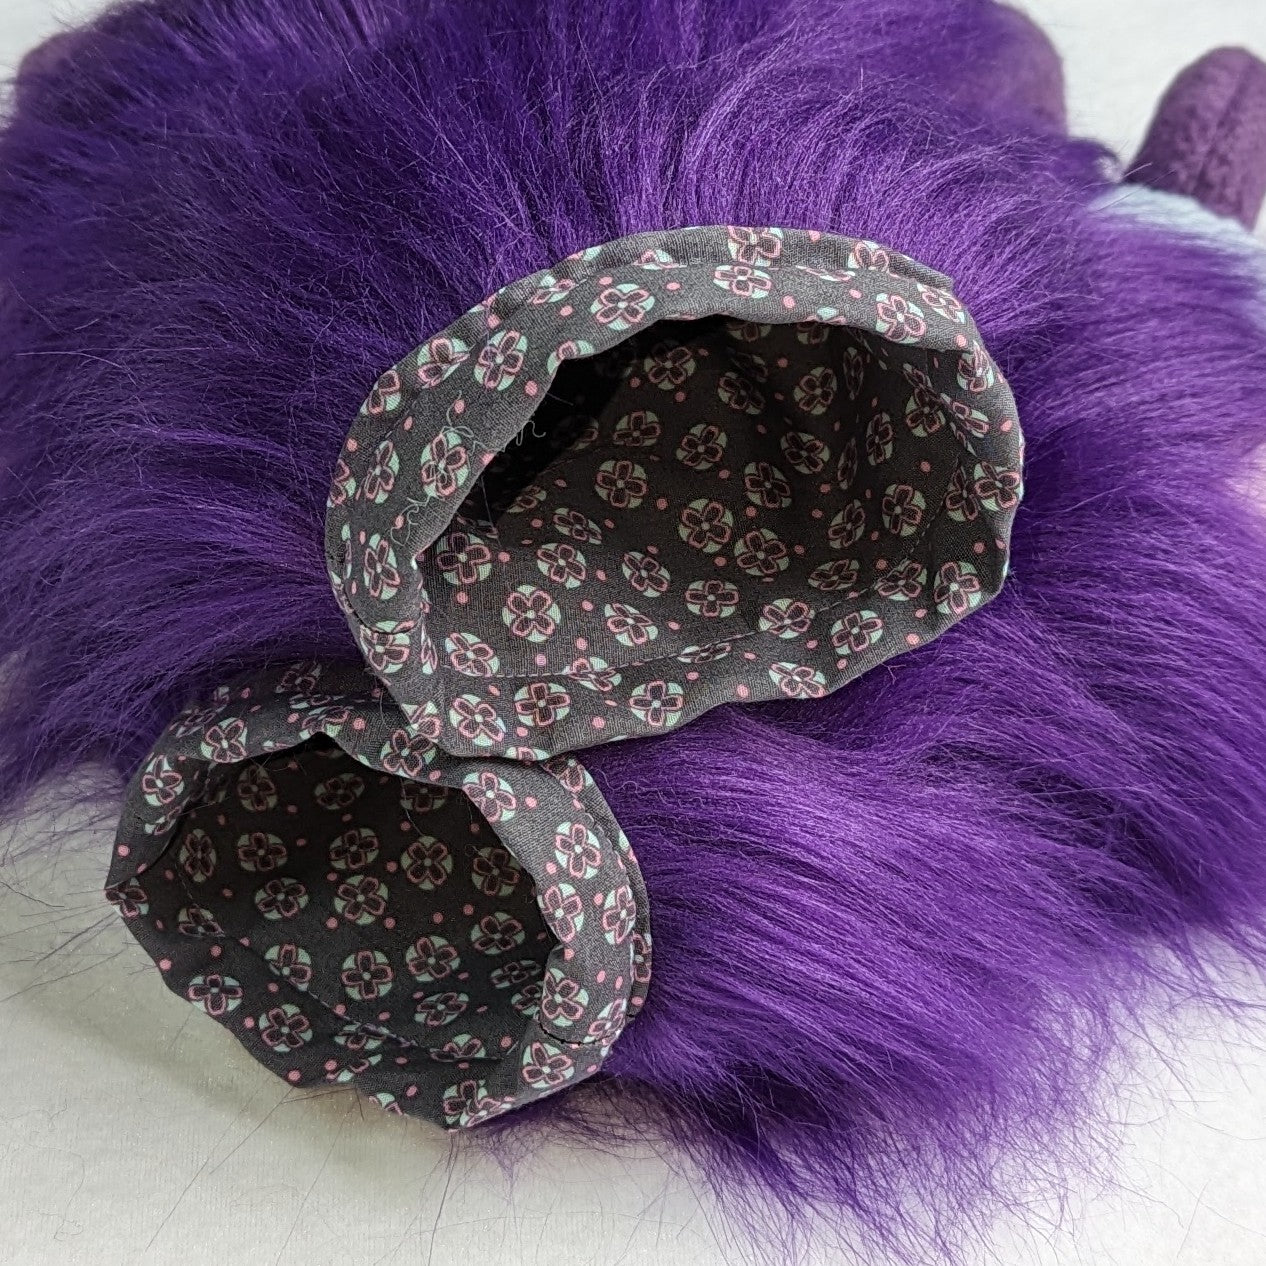 Hand Paws "Monkey purple" Special Edition!